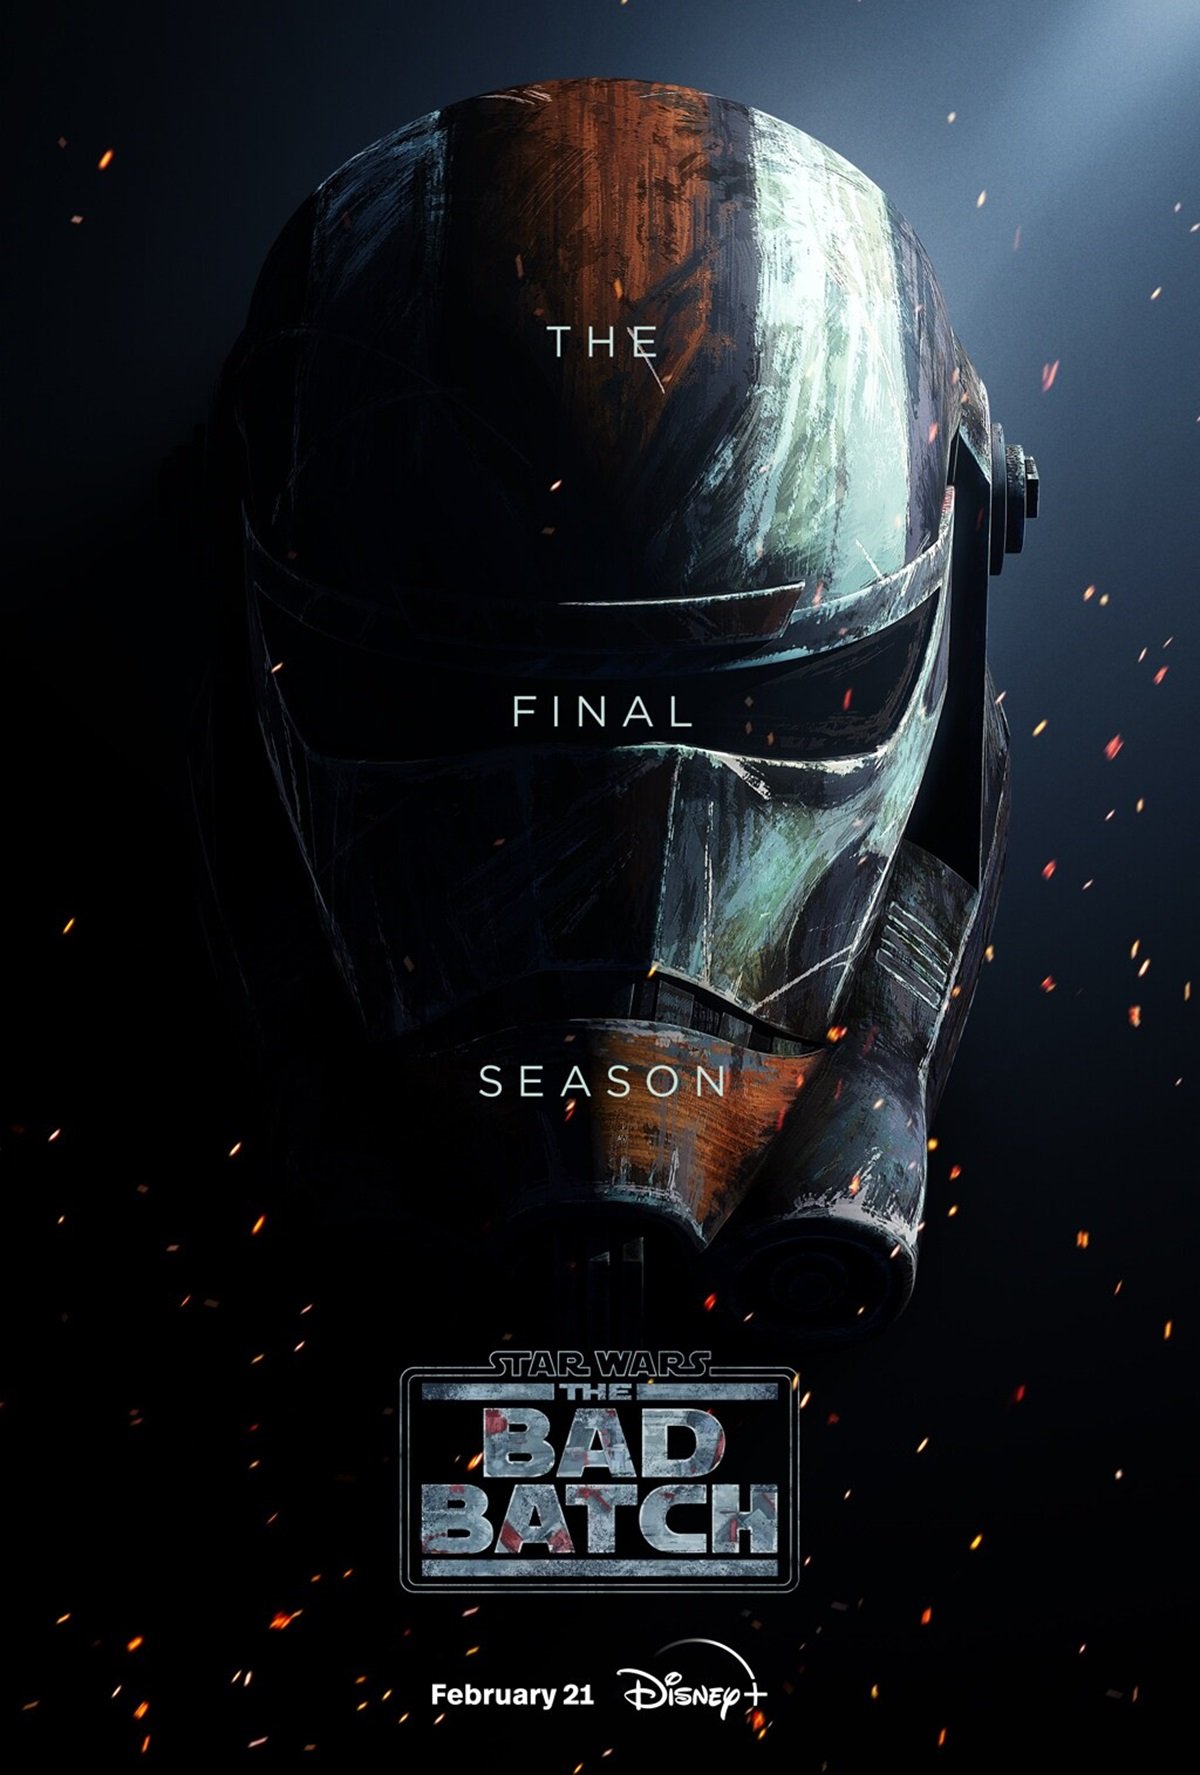 Teaser poster for the final season of Star Wars: The Bad Batch